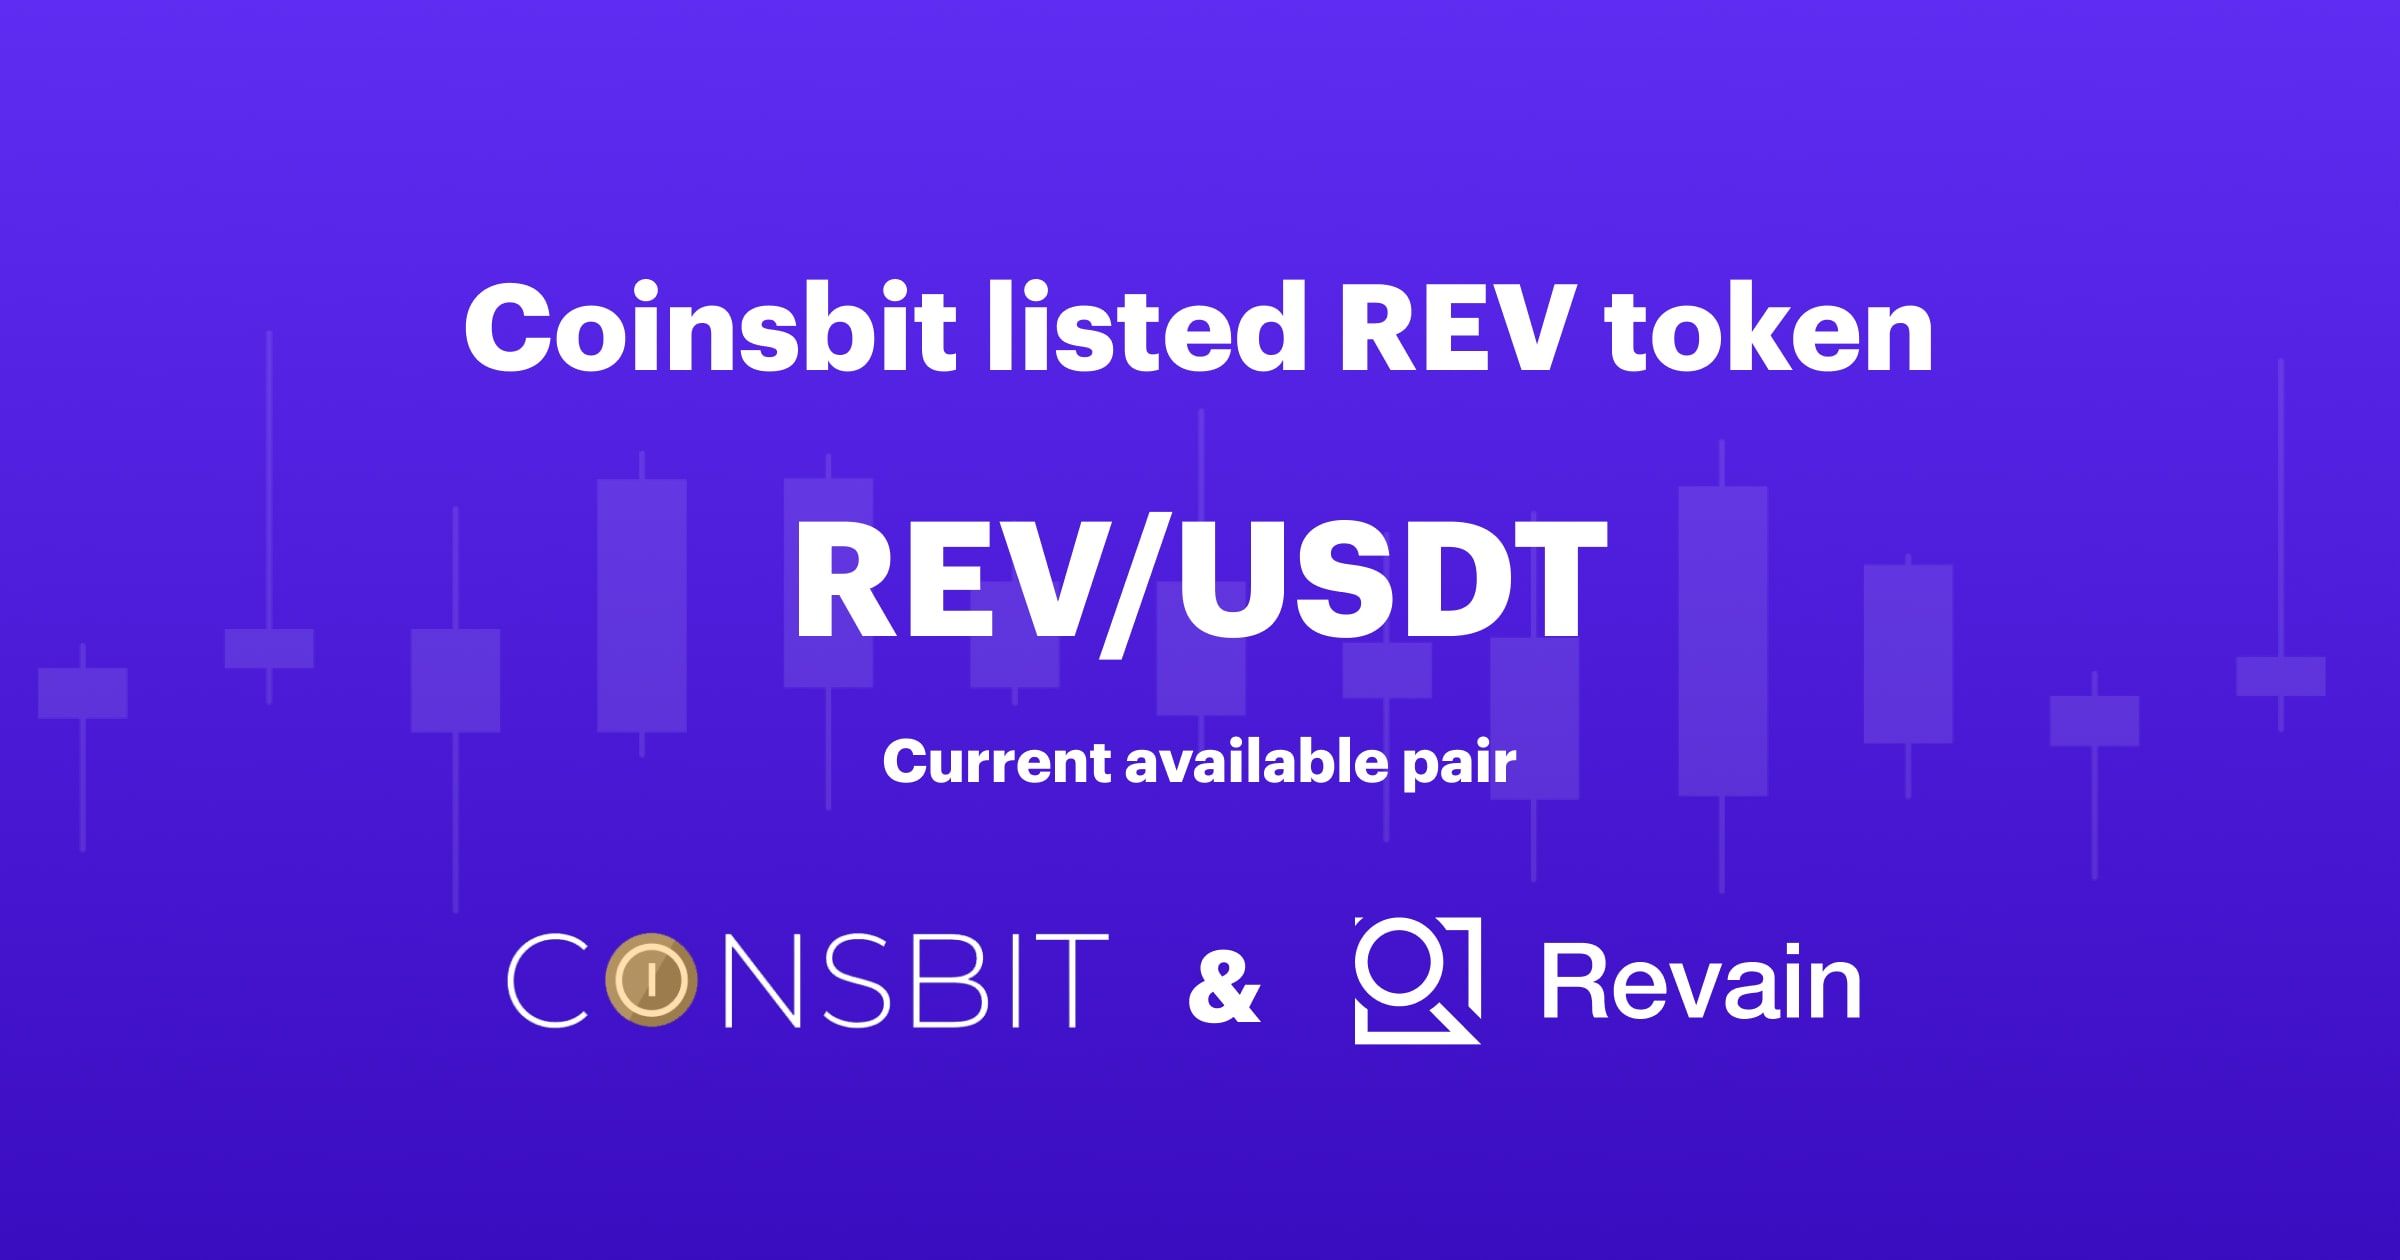 Revain is listed on the Coinsbit exchange